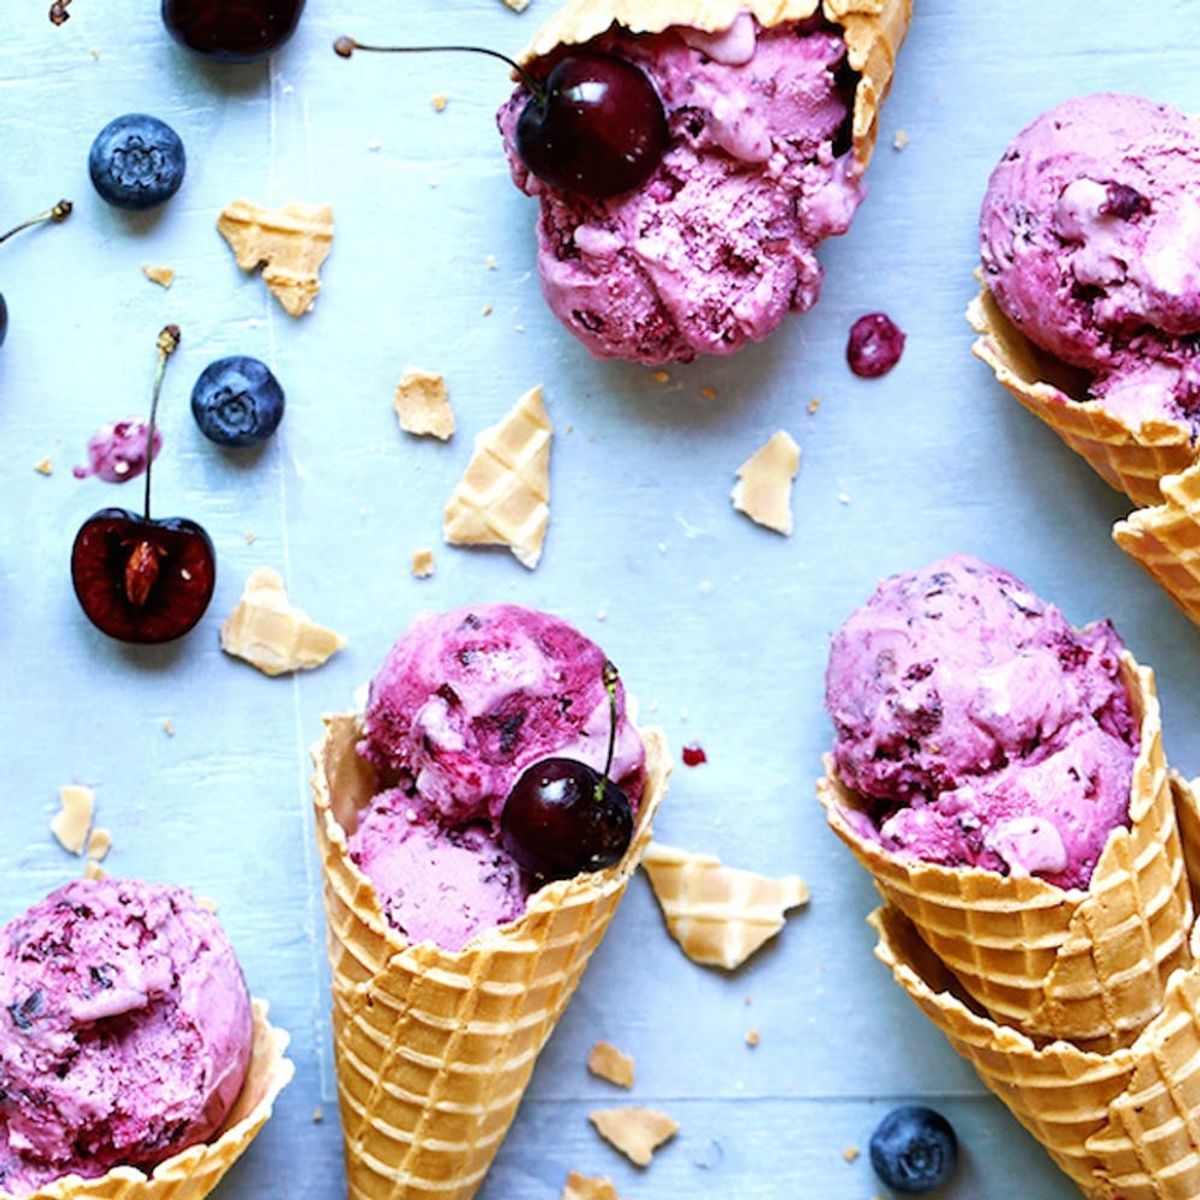 14 Boozy Ice Cream Recipes to Cool You Off This Summer